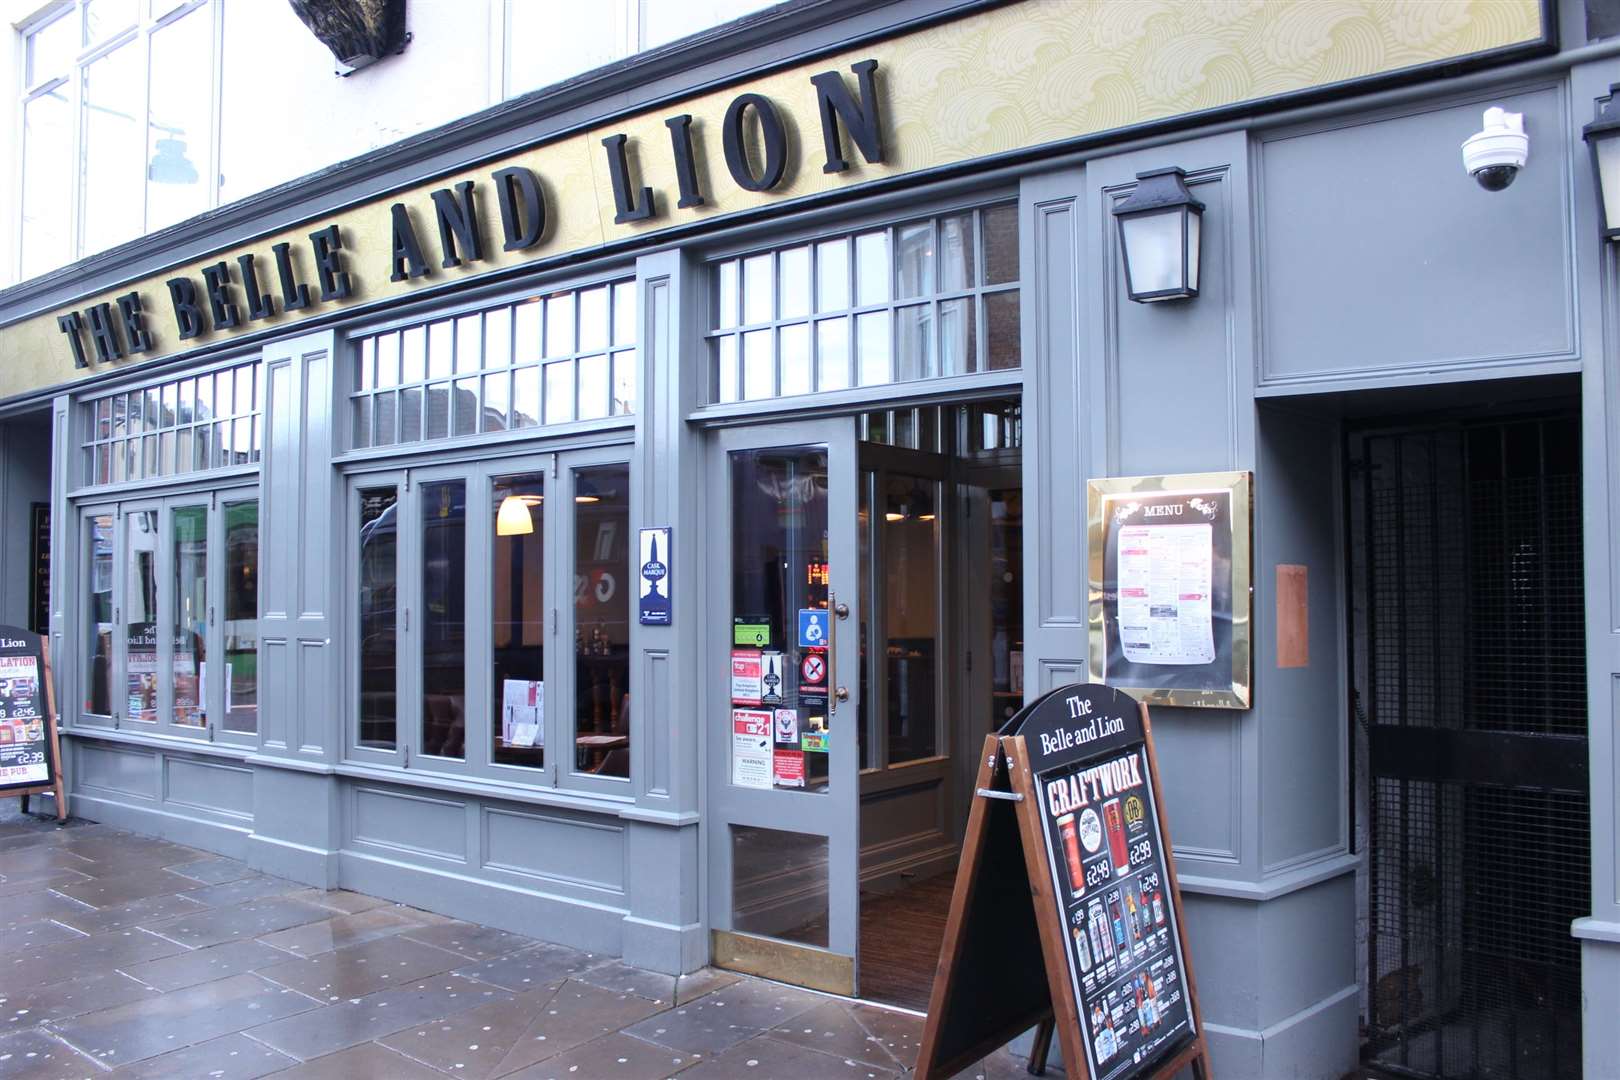 Kent has 23 Wetherspoons, including the Belle and Lion pub in Sheerness High Street